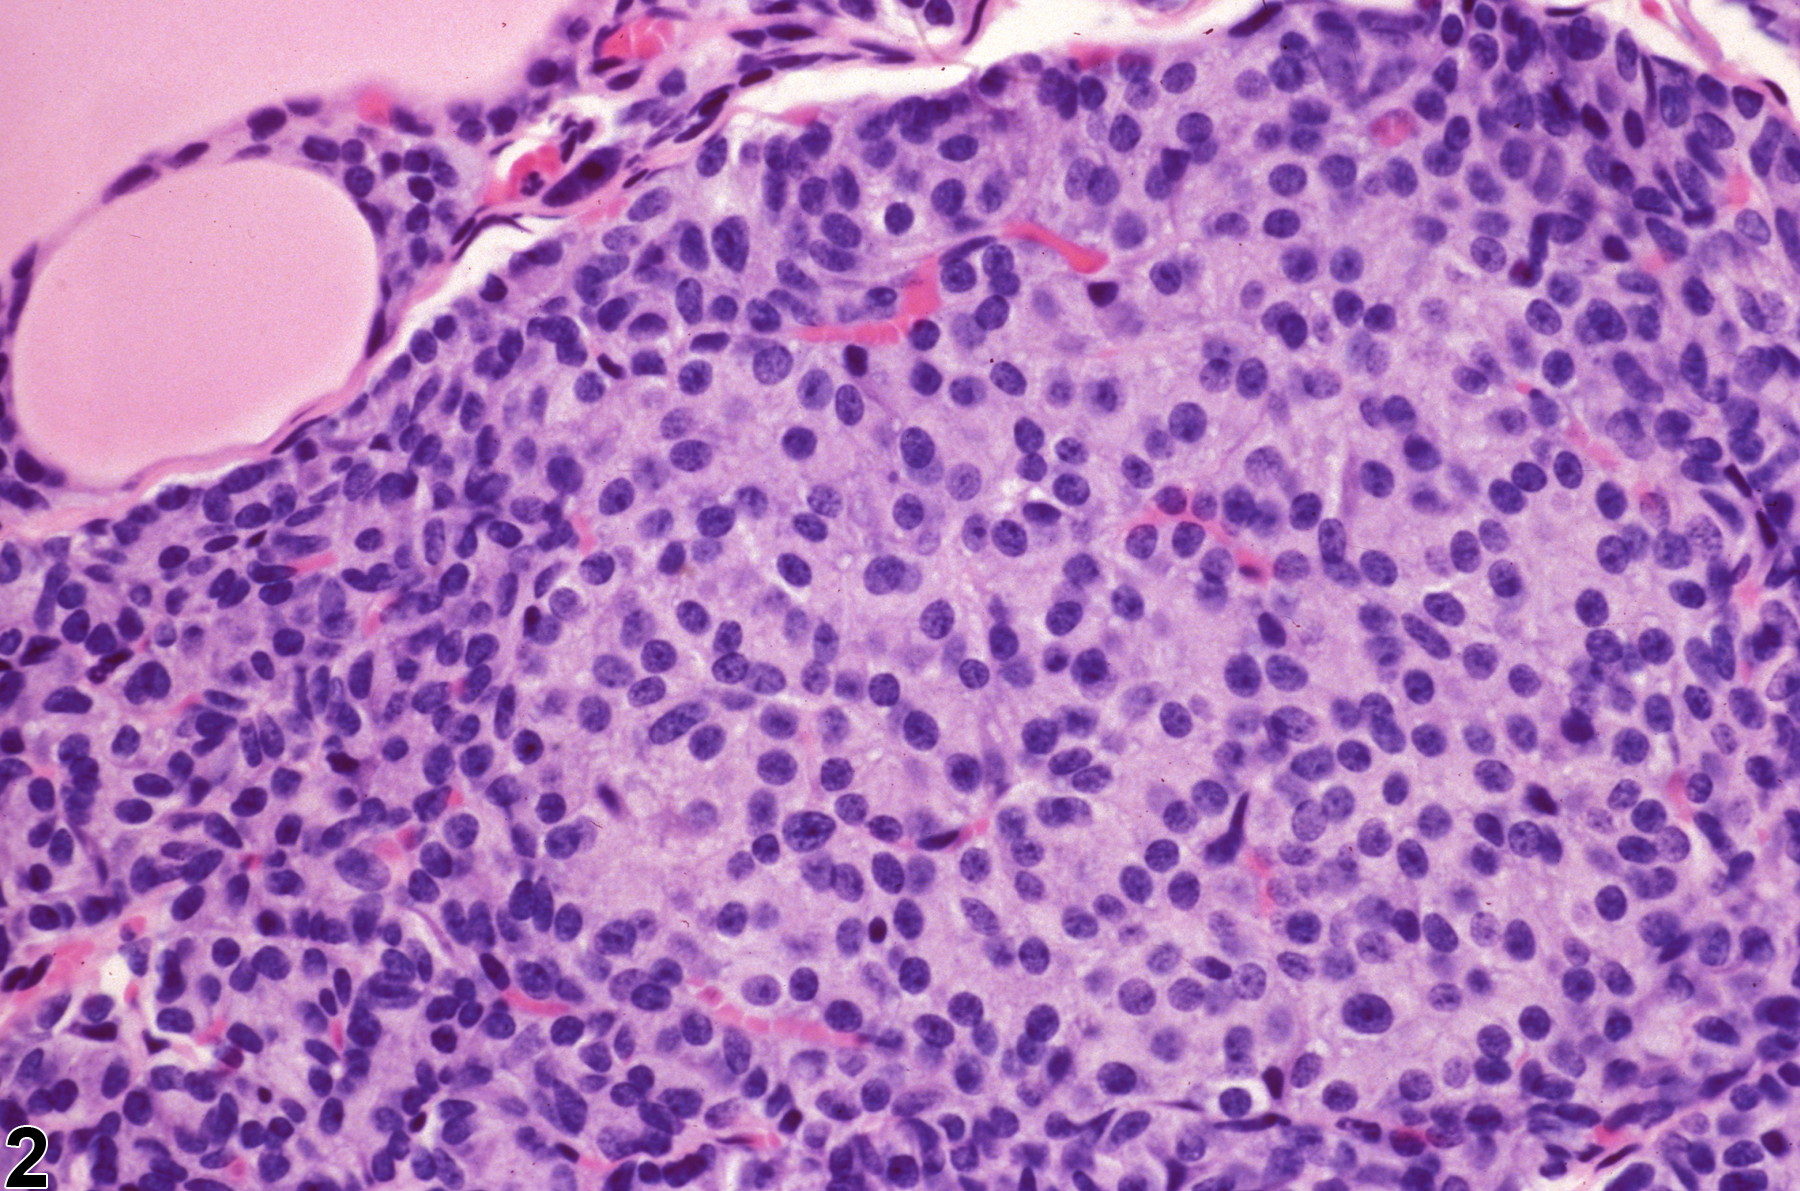 Image of hyperplasia, focal in the parathyroid gland from a male F344/N rat in a chronic study